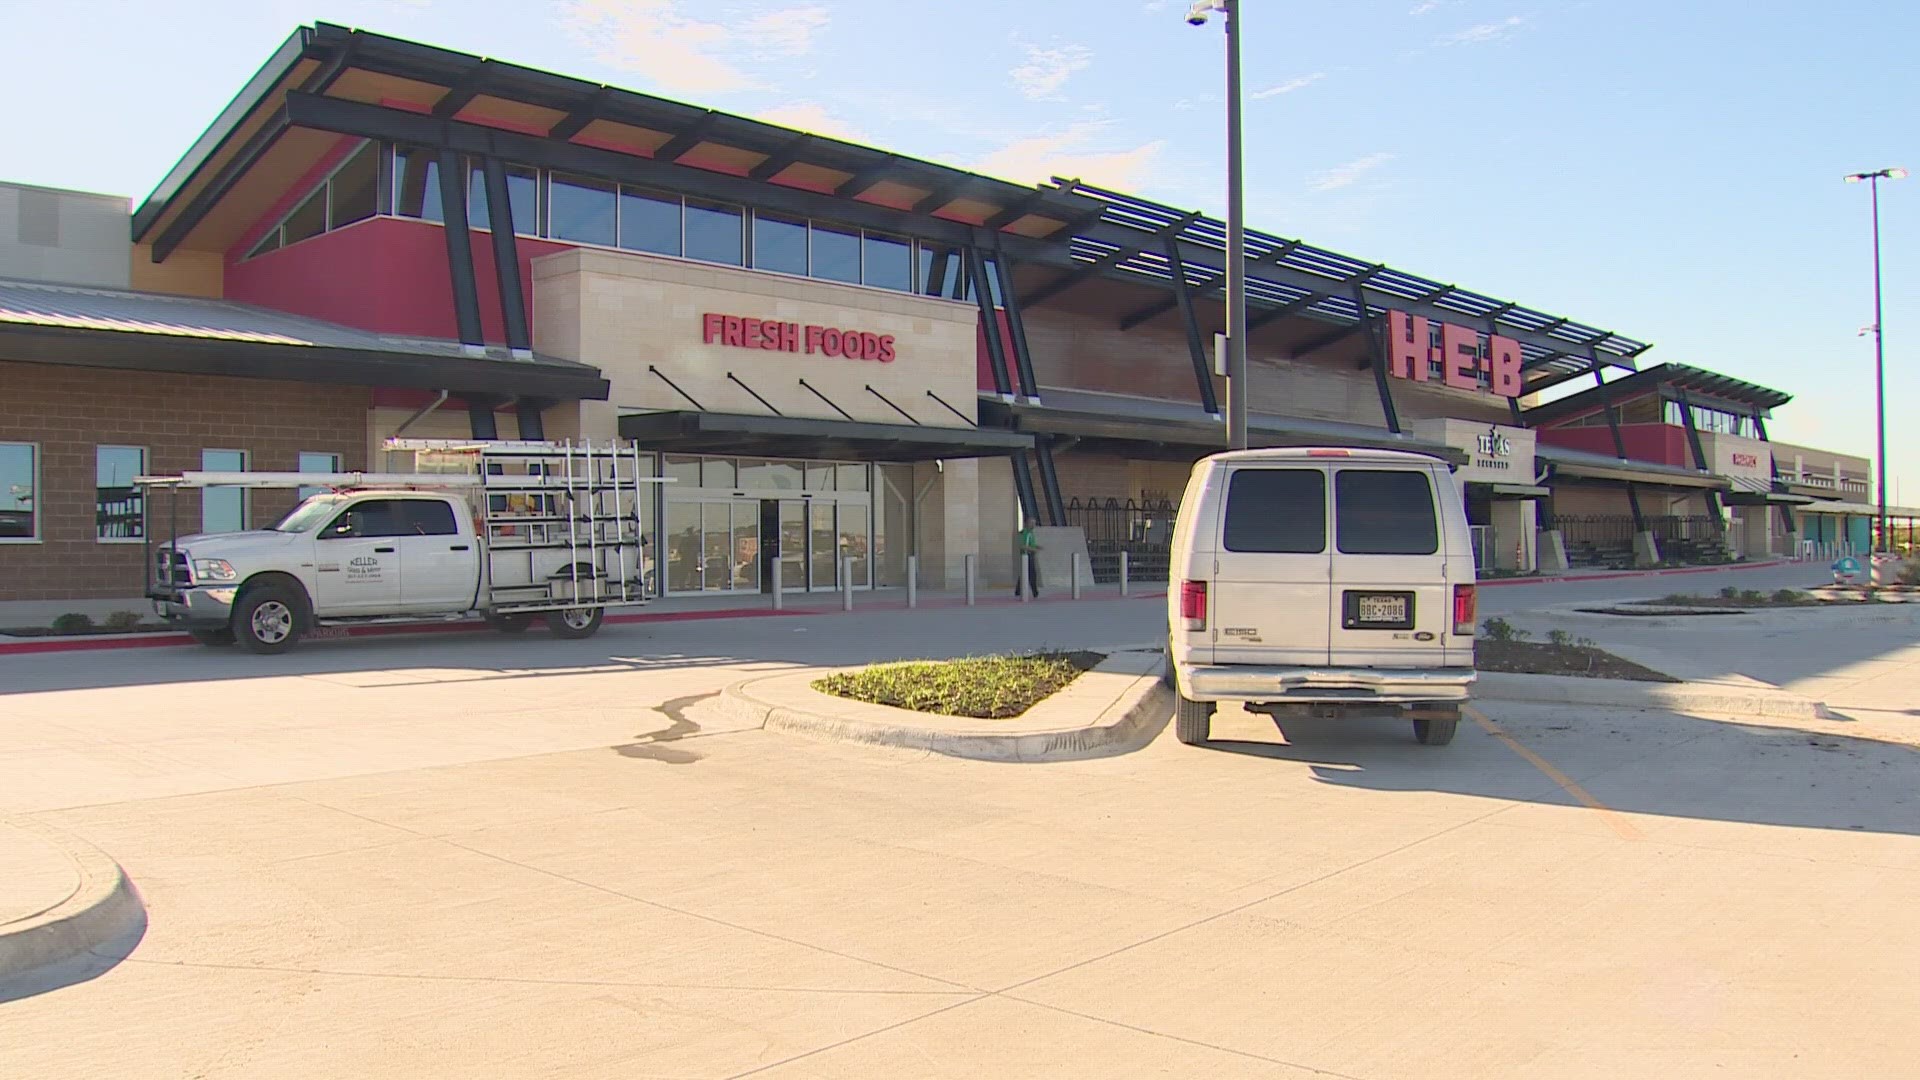 The city of Forney confirmed Friday that H-E-B, the renowned regional supermarket chain, has plans to build a new store within The Villages at Gateway development.